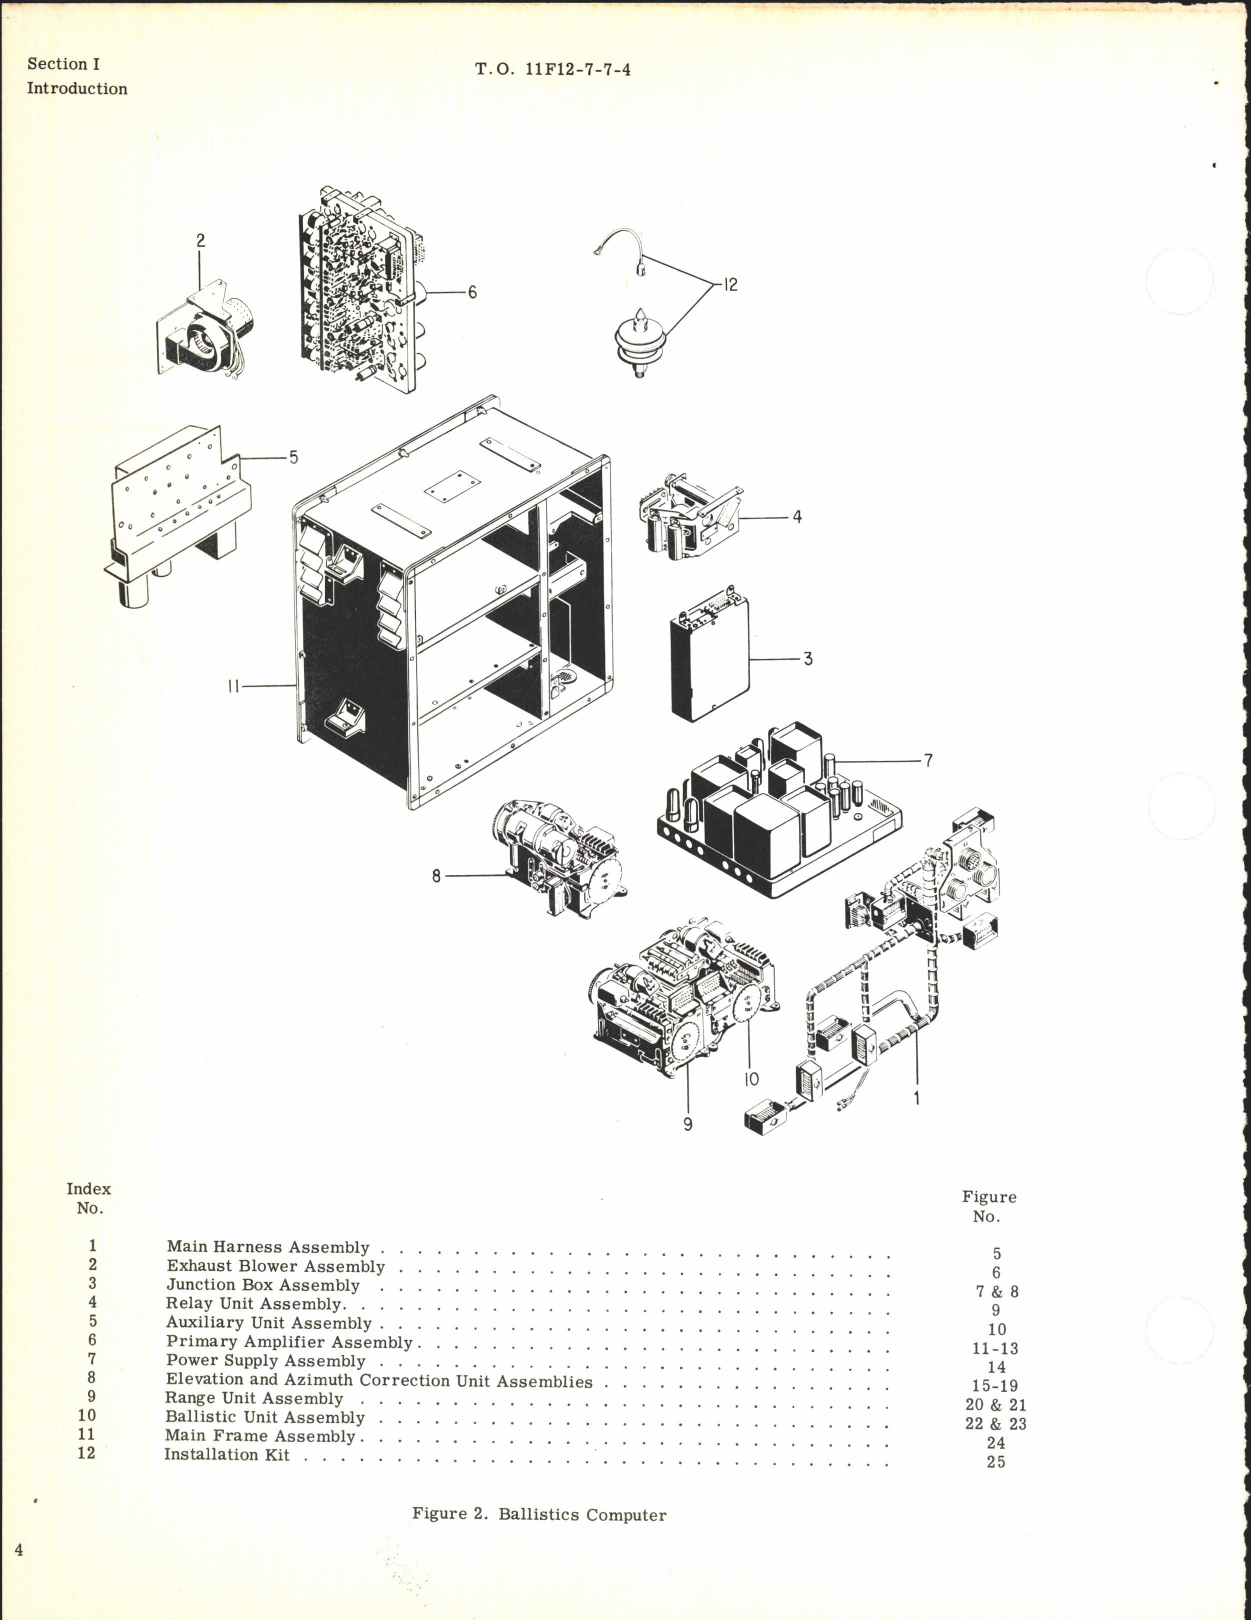 Sample page 8 from AirCorps Library document: Illustrated Parts Breakdown for Ballistics Computer Part No. 7176E28G1 and Computer Installation Kit 129L686G1